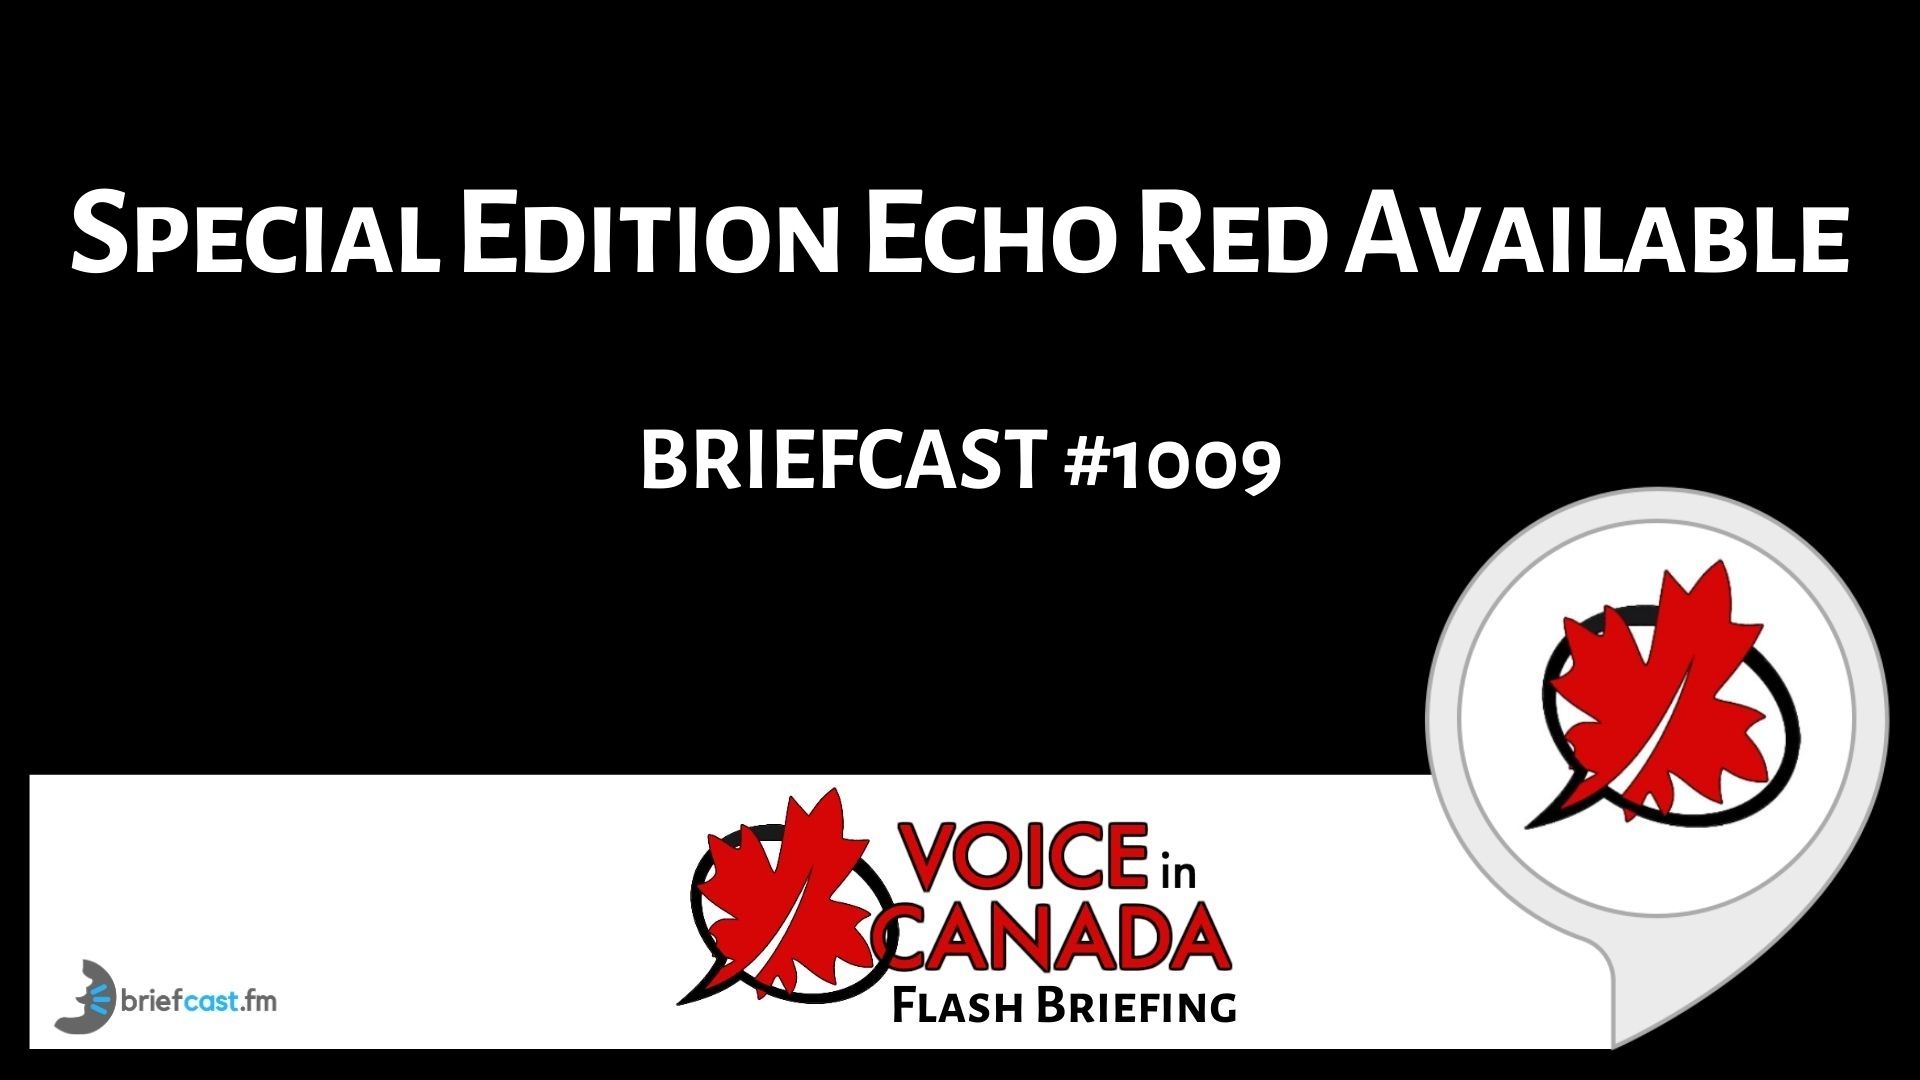 Special Edition Echo Red Available